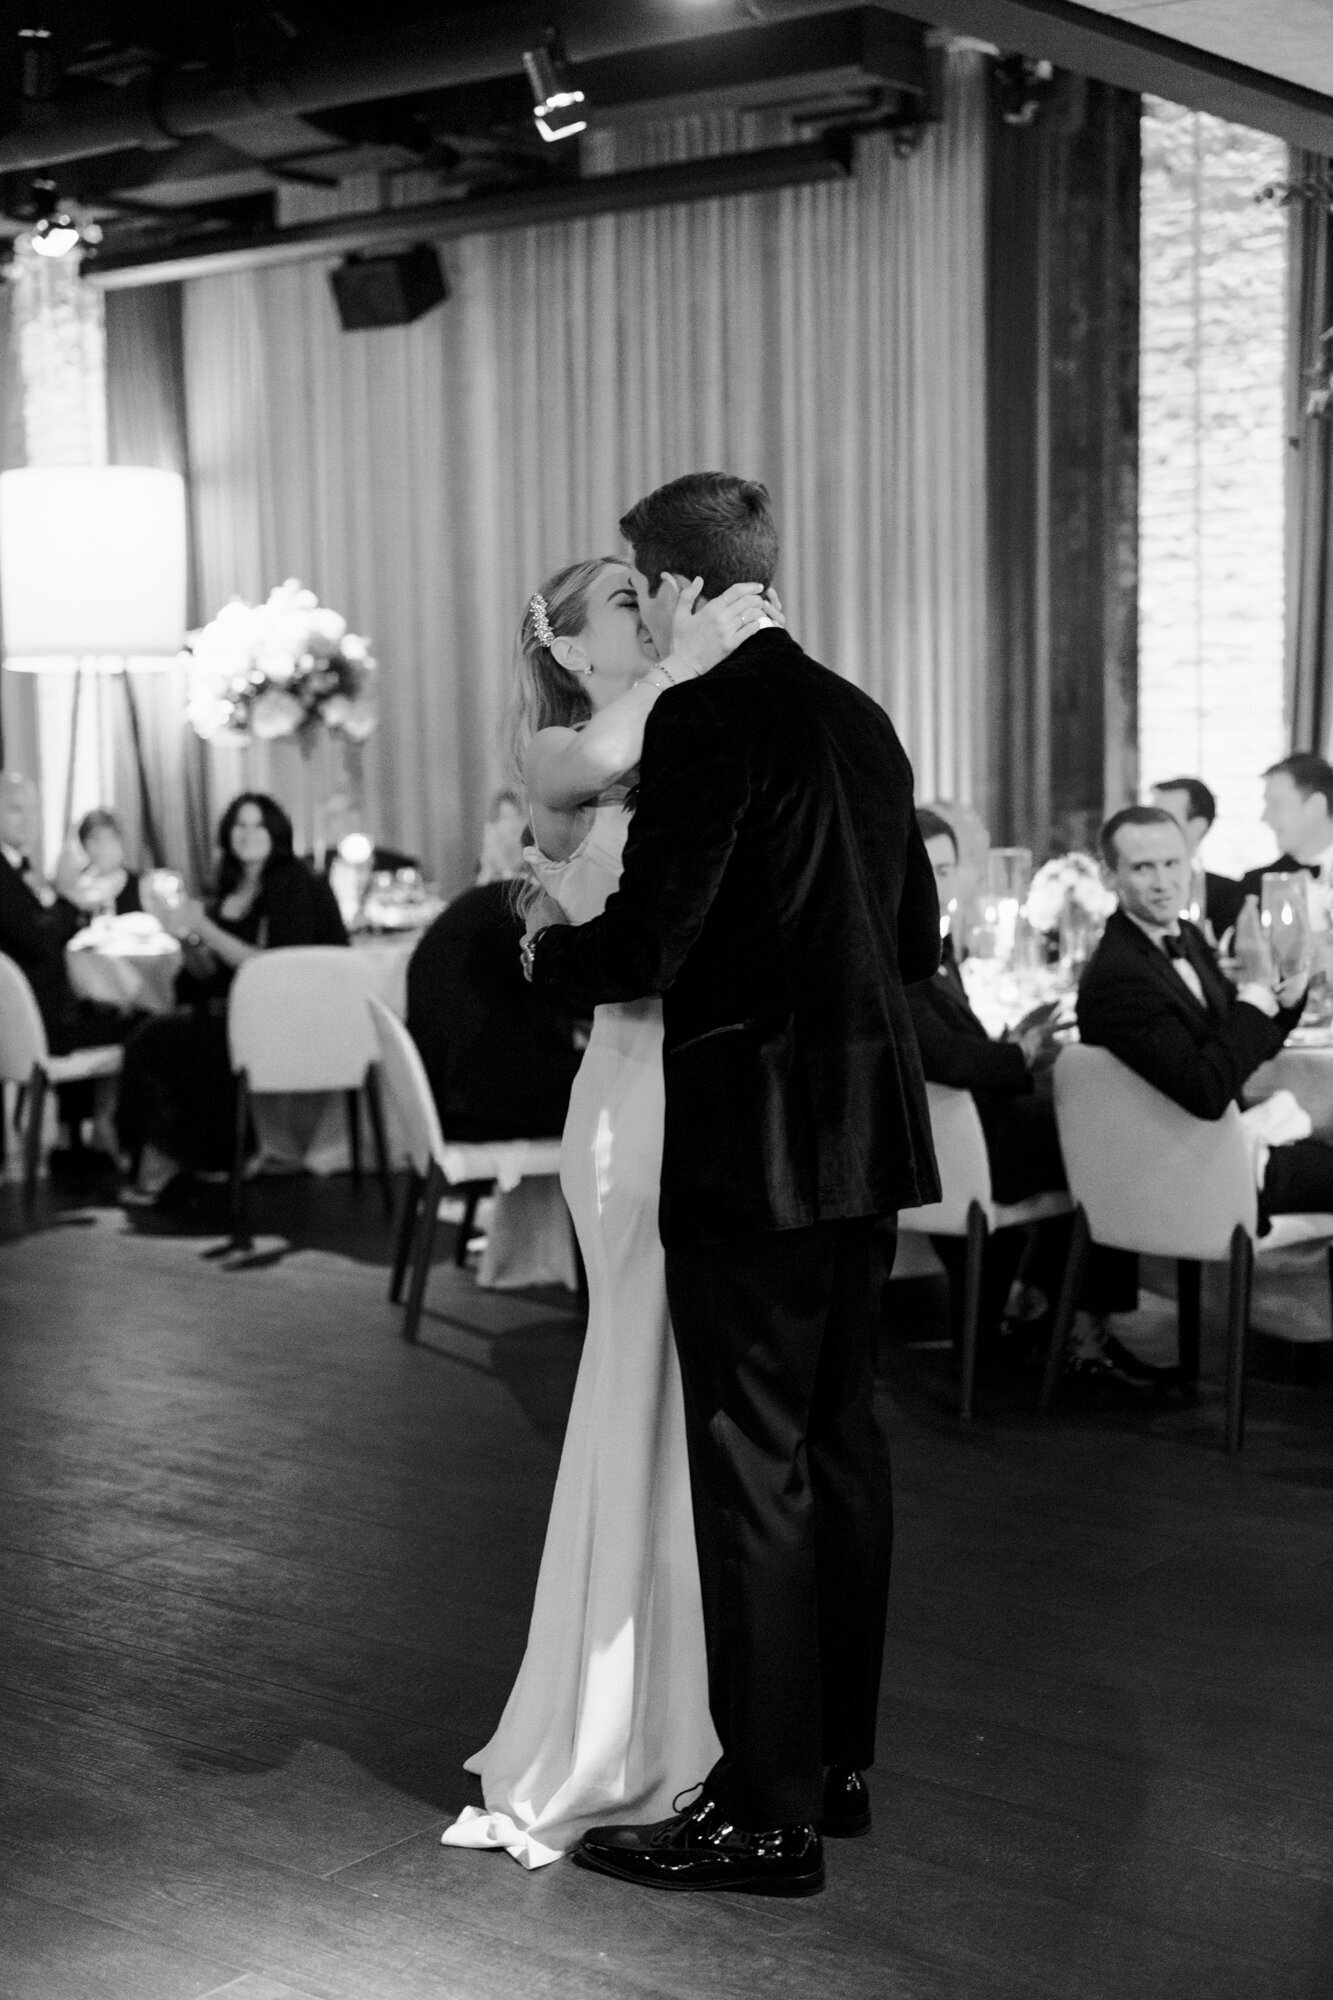 A black and white first dance photo at a wedding reception captured at the Dalcy in Chicago